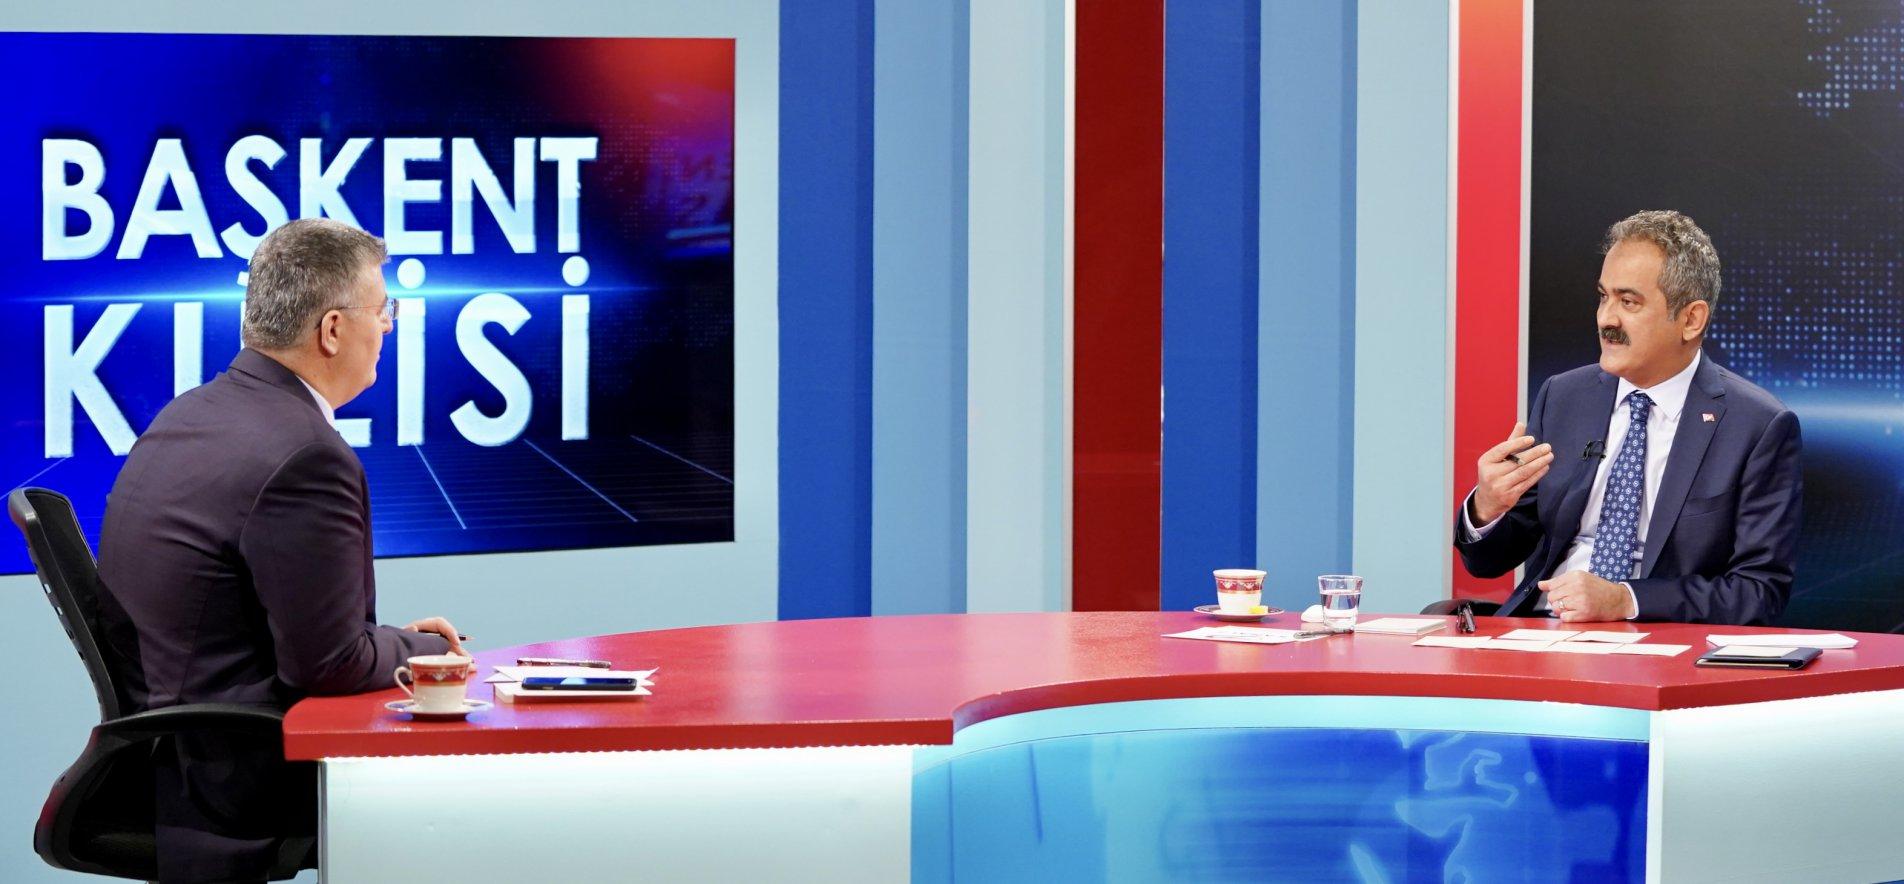 MINISTER ÖZER COMMENTS ABOUT THE EDUCATION AGENDA DURING A LIVE PROGRAM AT KANAL 7